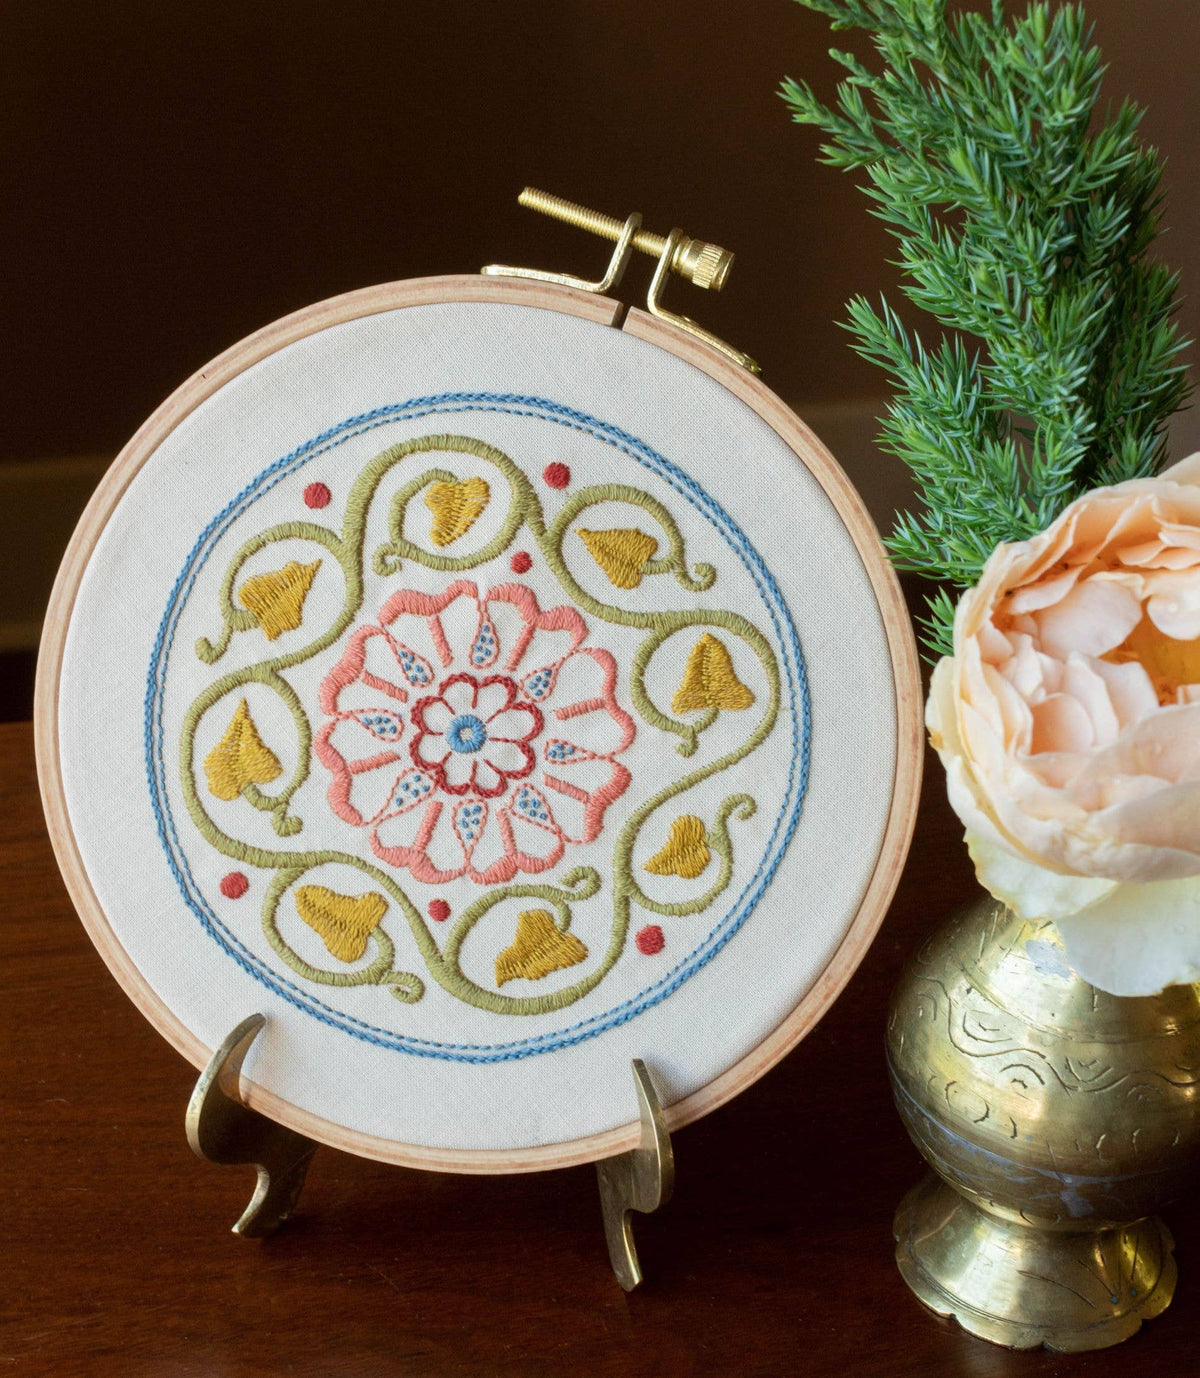 Arcadian Rose Embroidery kit by Avlea Folk Embroidery